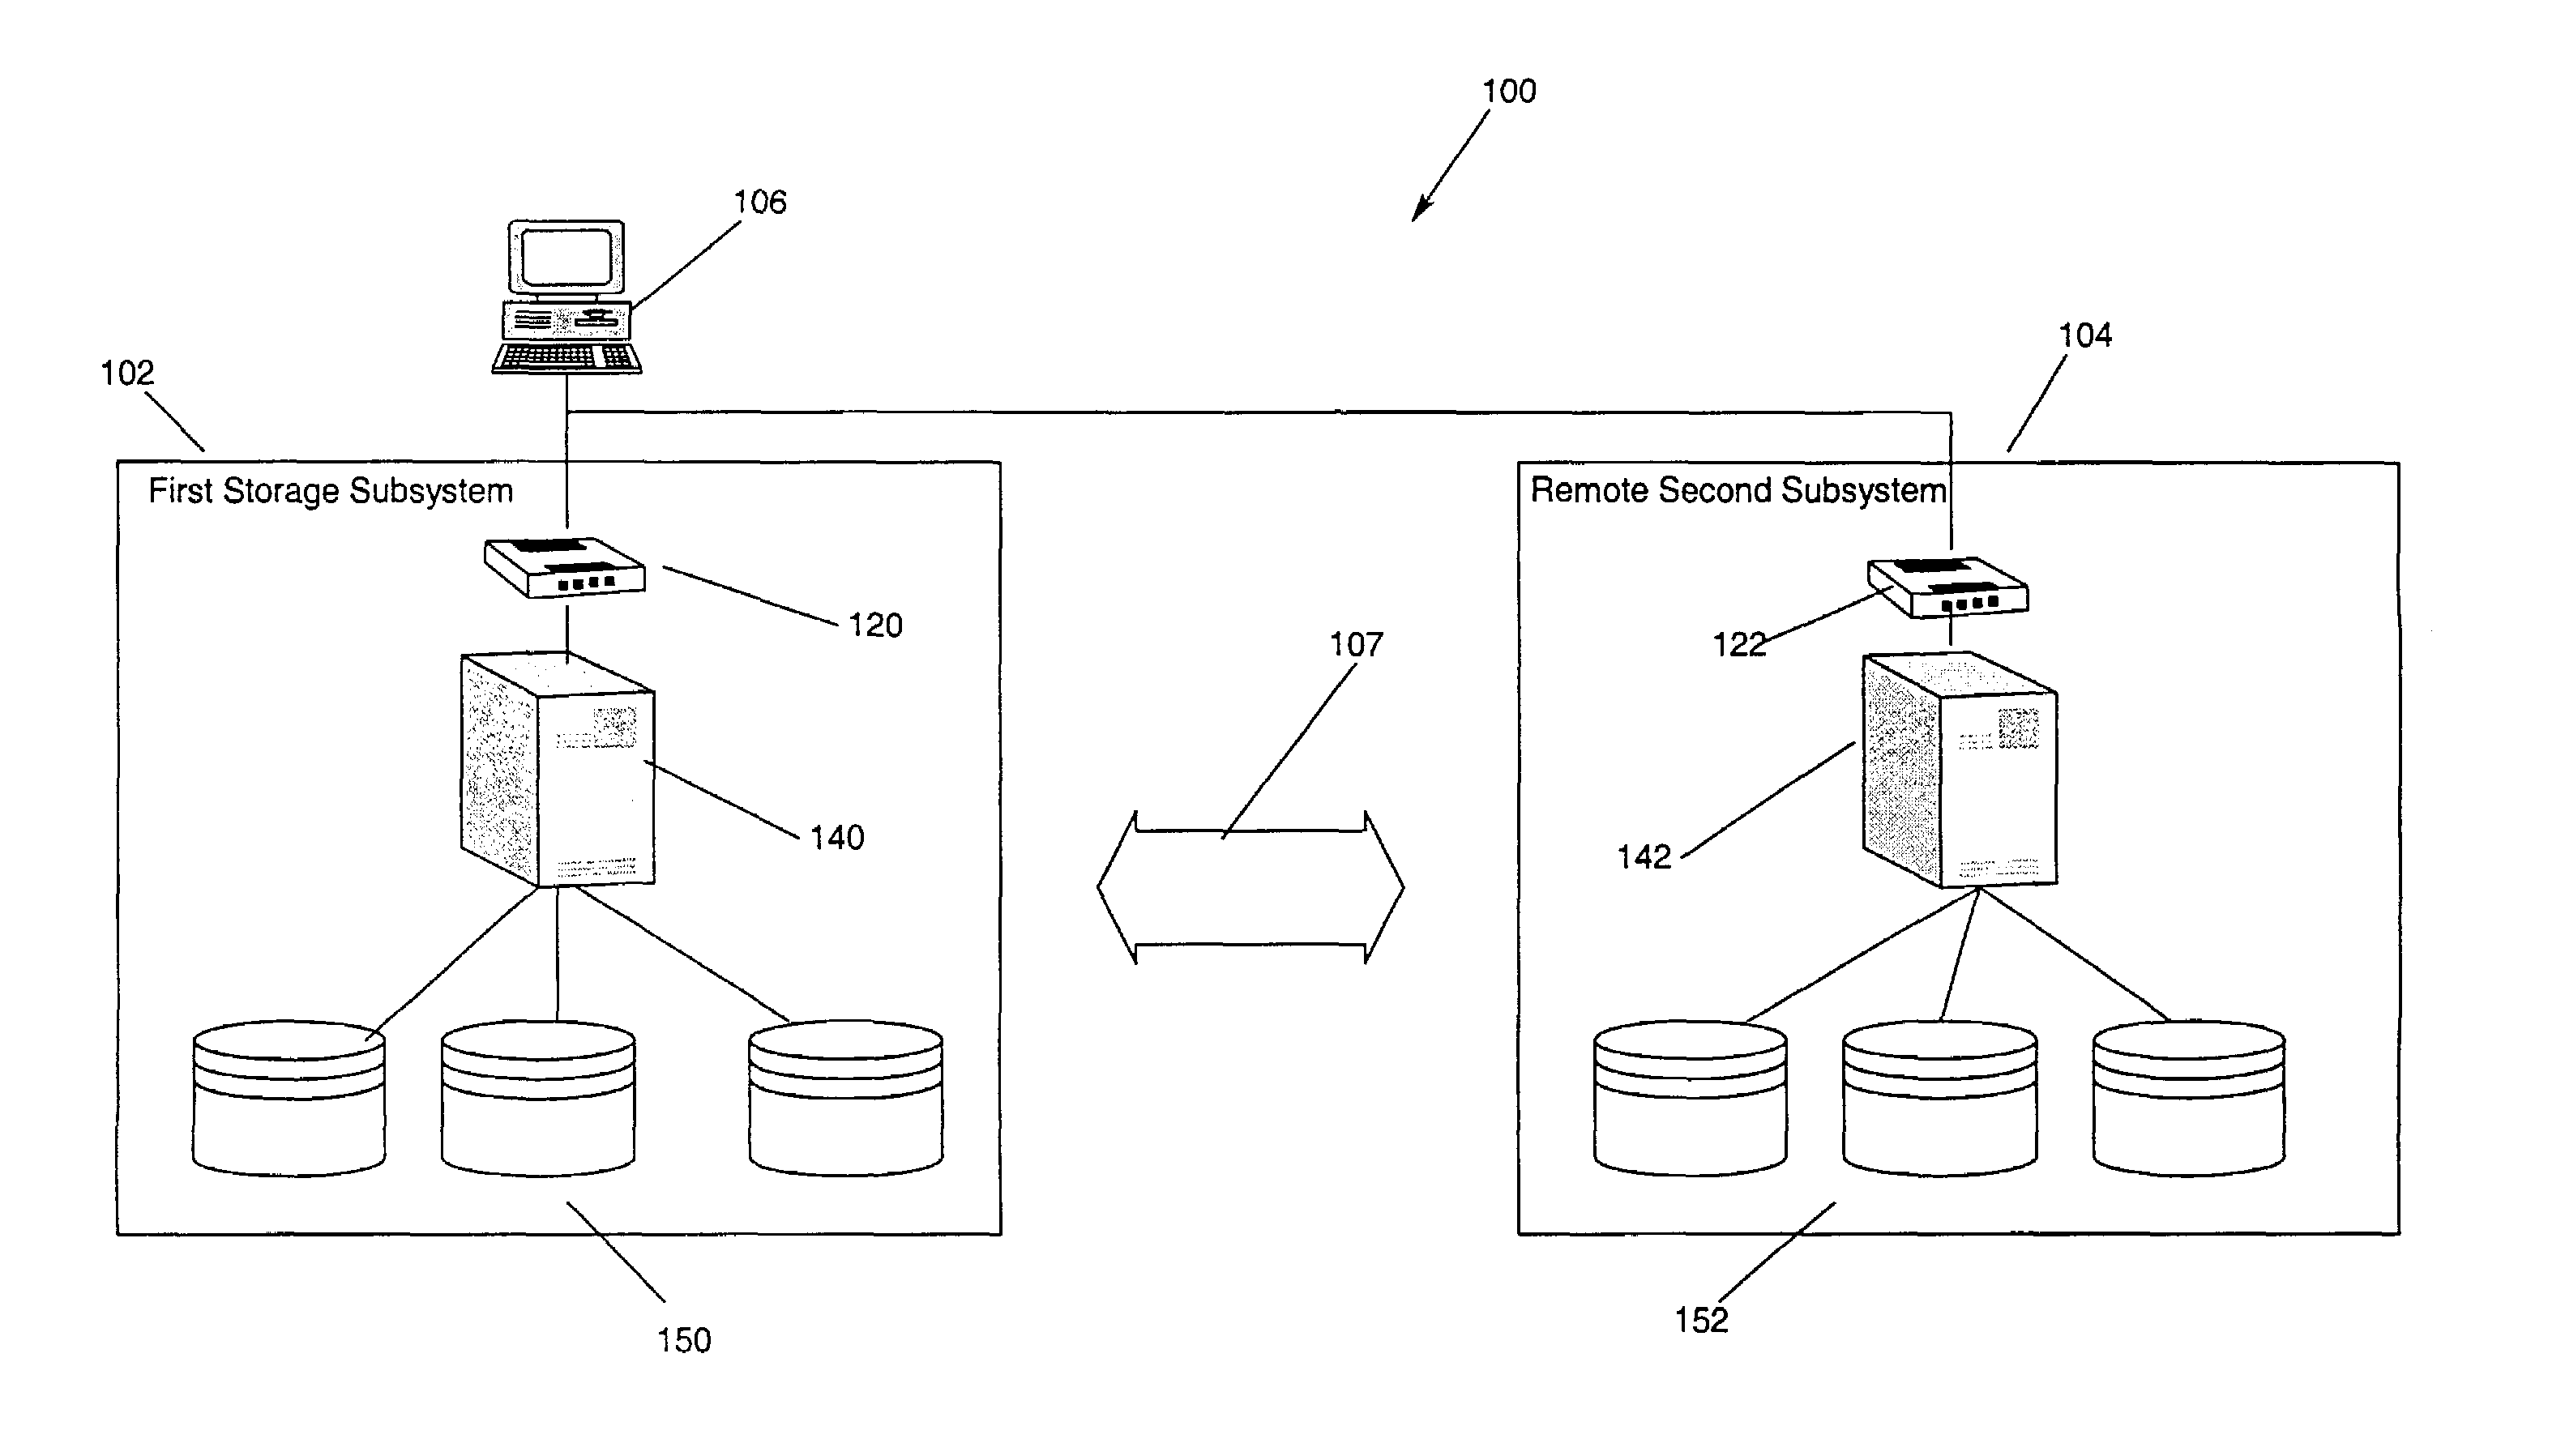 Method, apparatus and program storage device for maintaining data consistency and cache coherency during communications failures between nodes in a remote mirror pair